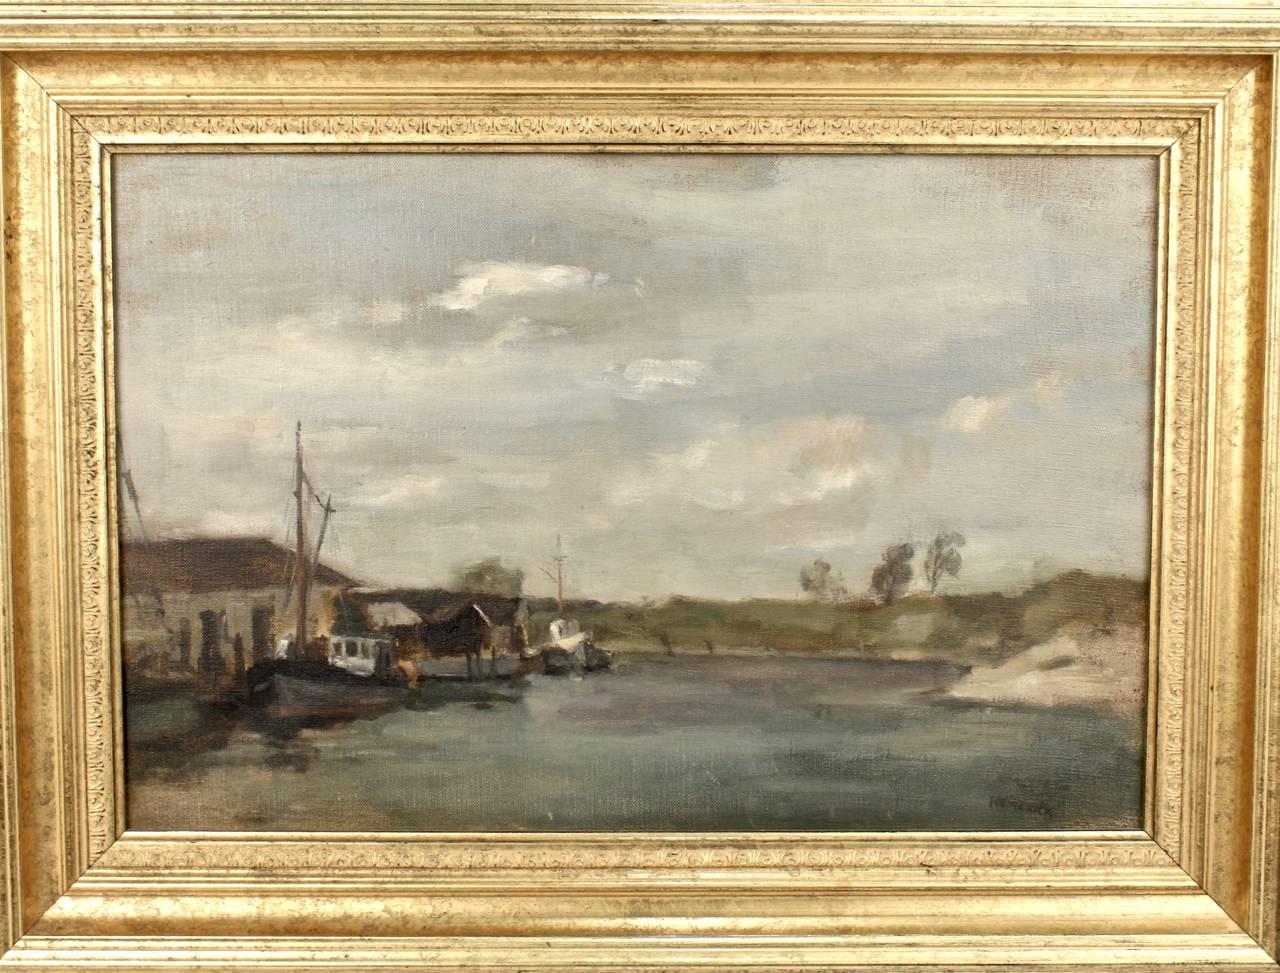 Seymour Remenick (1923-1999).

An untitled oil on canvas painting of a marine scene with boats and a small dock on an inlet. Likely an Atlantic Seaboard scene from the Southern New Jersey, Maryland, or Delaware coast.

Remenick was raised in